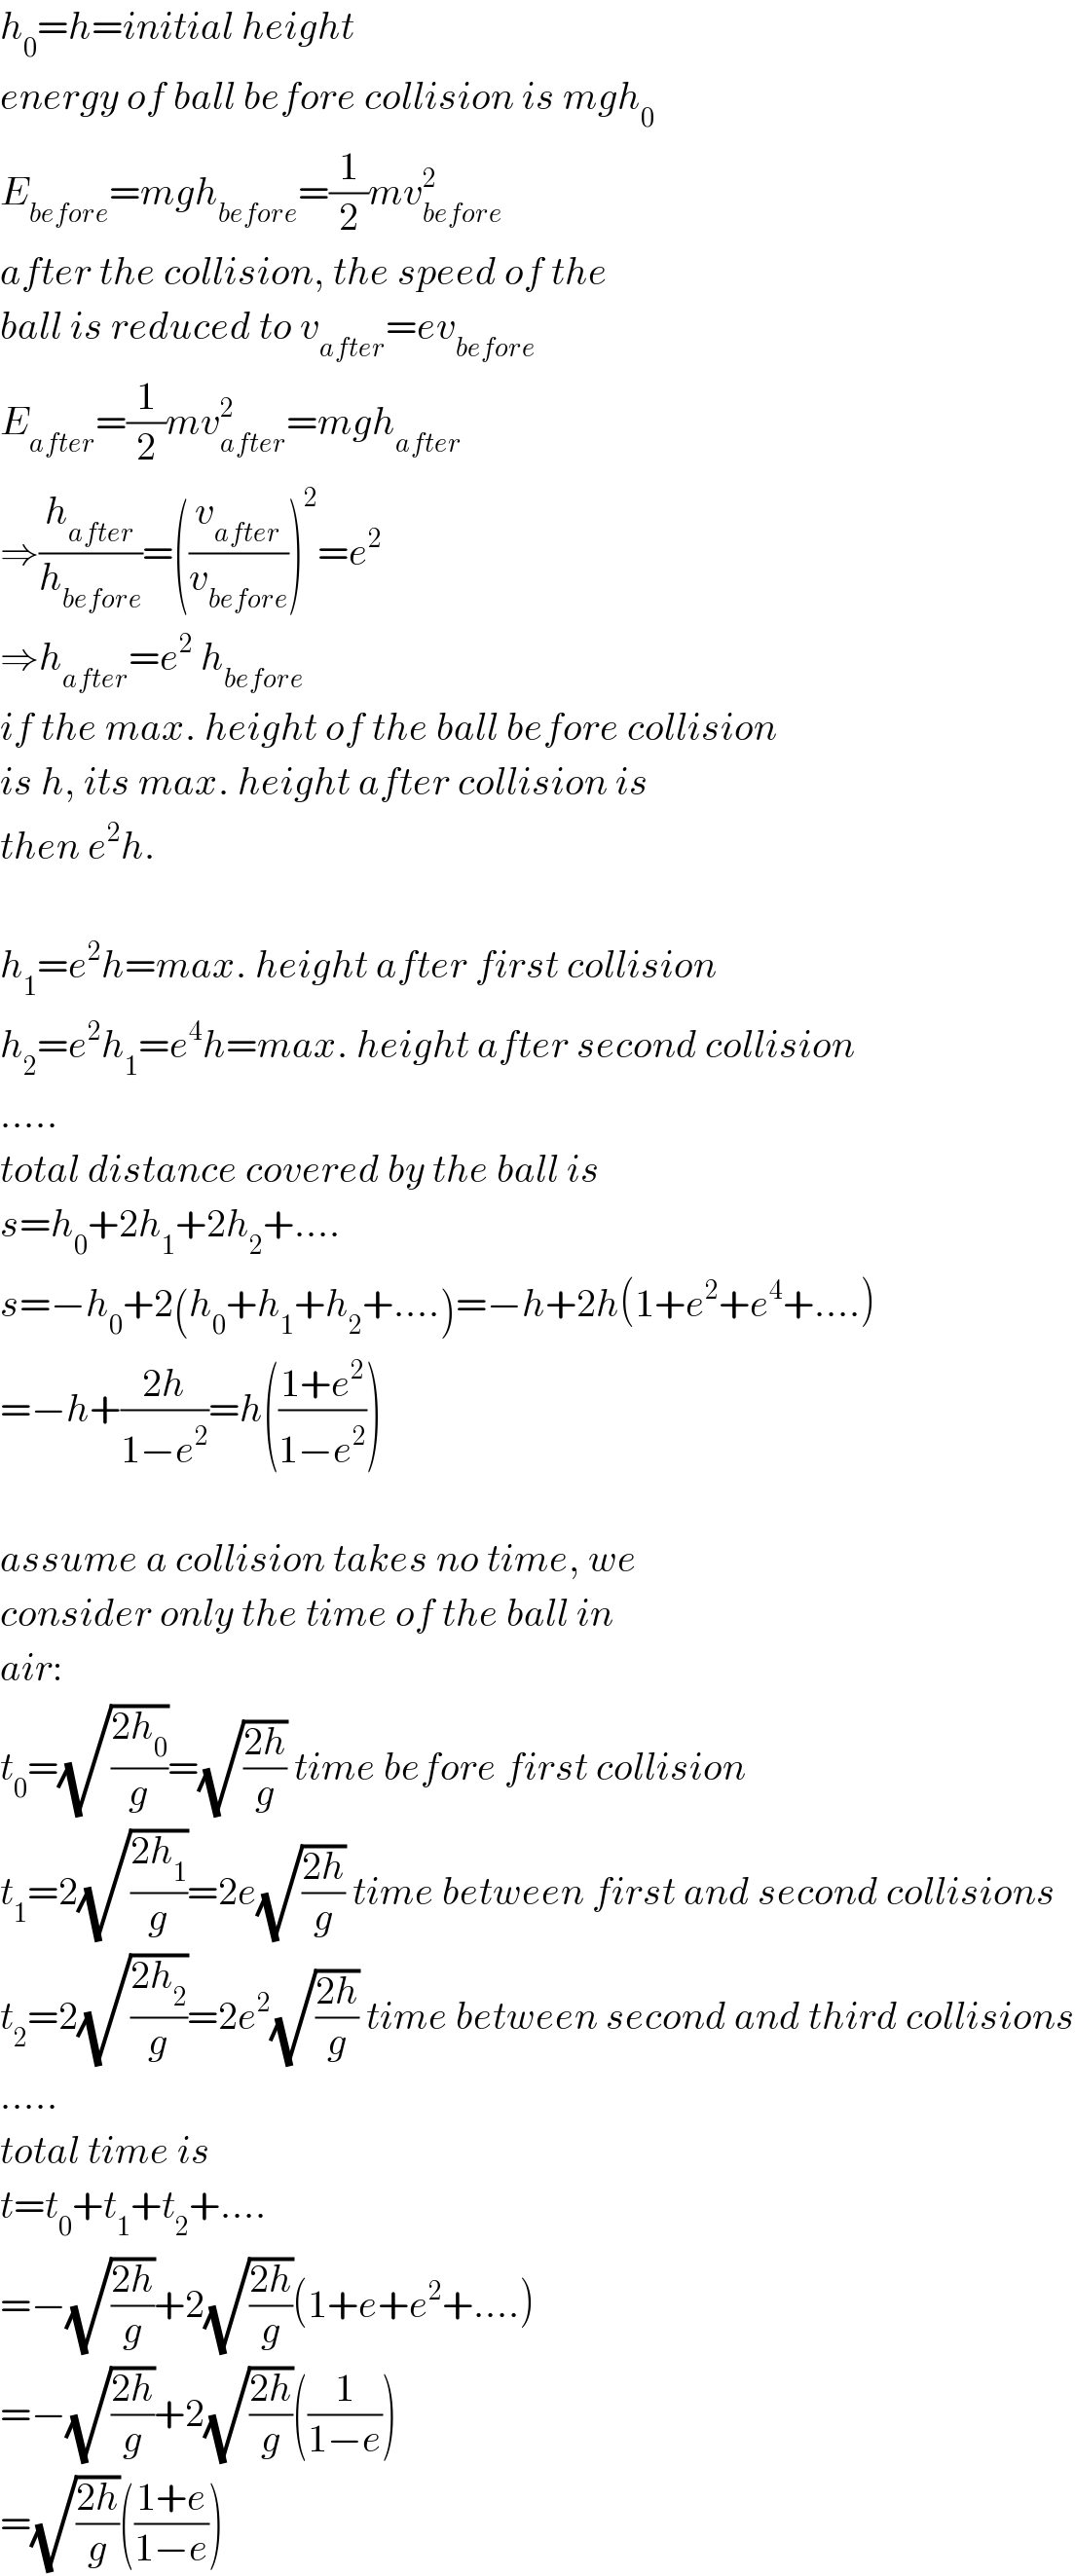 h_0 =h=initial height  energy of ball before collision is mgh_0   E_(before) =mgh_(before) =(1/2)mv_(before) ^2   after the collision, the speed of the  ball is reduced to v_(after) =ev_(before)   E_(after) =(1/2)mv_(after) ^2 =mgh_(after)   ⇒(h_(after) /h_(before) )=((v_(after) /v_(before) ))^2 =e^2   ⇒h_(after) =e^2  h_(before)   if the max. height of the ball before collision  is h, its max. height after collision is  then e^2 h.    h_1 =e^2 h=max. height after first collision  h_2 =e^2 h_1 =e^4 h=max. height after second collision  .....  total distance covered by the ball is  s=h_0 +2h_1 +2h_2 +....  s=−h_0 +2(h_0 +h_1 +h_2 +....)=−h+2h(1+e^2 +e^4 +....)  =−h+((2h)/(1−e^2 ))=h(((1+e^2 )/(1−e^2 )))    assume a collision takes no time, we  consider only the time of the ball in  air:  t_0 =(√((2h_0 )/g))=(√((2h)/g)) time before first collision  t_1 =2(√((2h_1 )/g))=2e(√((2h)/g)) time between first and second collisions  t_2 =2(√((2h_2 )/g))=2e^2 (√((2h)/g)) time between second and third collisions  .....  total time is  t=t_0 +t_1 +t_2 +....  =−(√((2h)/g))+2(√((2h)/g))(1+e+e^2 +....)  =−(√((2h)/g))+2(√((2h)/g))((1/(1−e)))  =(√((2h)/g))(((1+e)/(1−e)))  